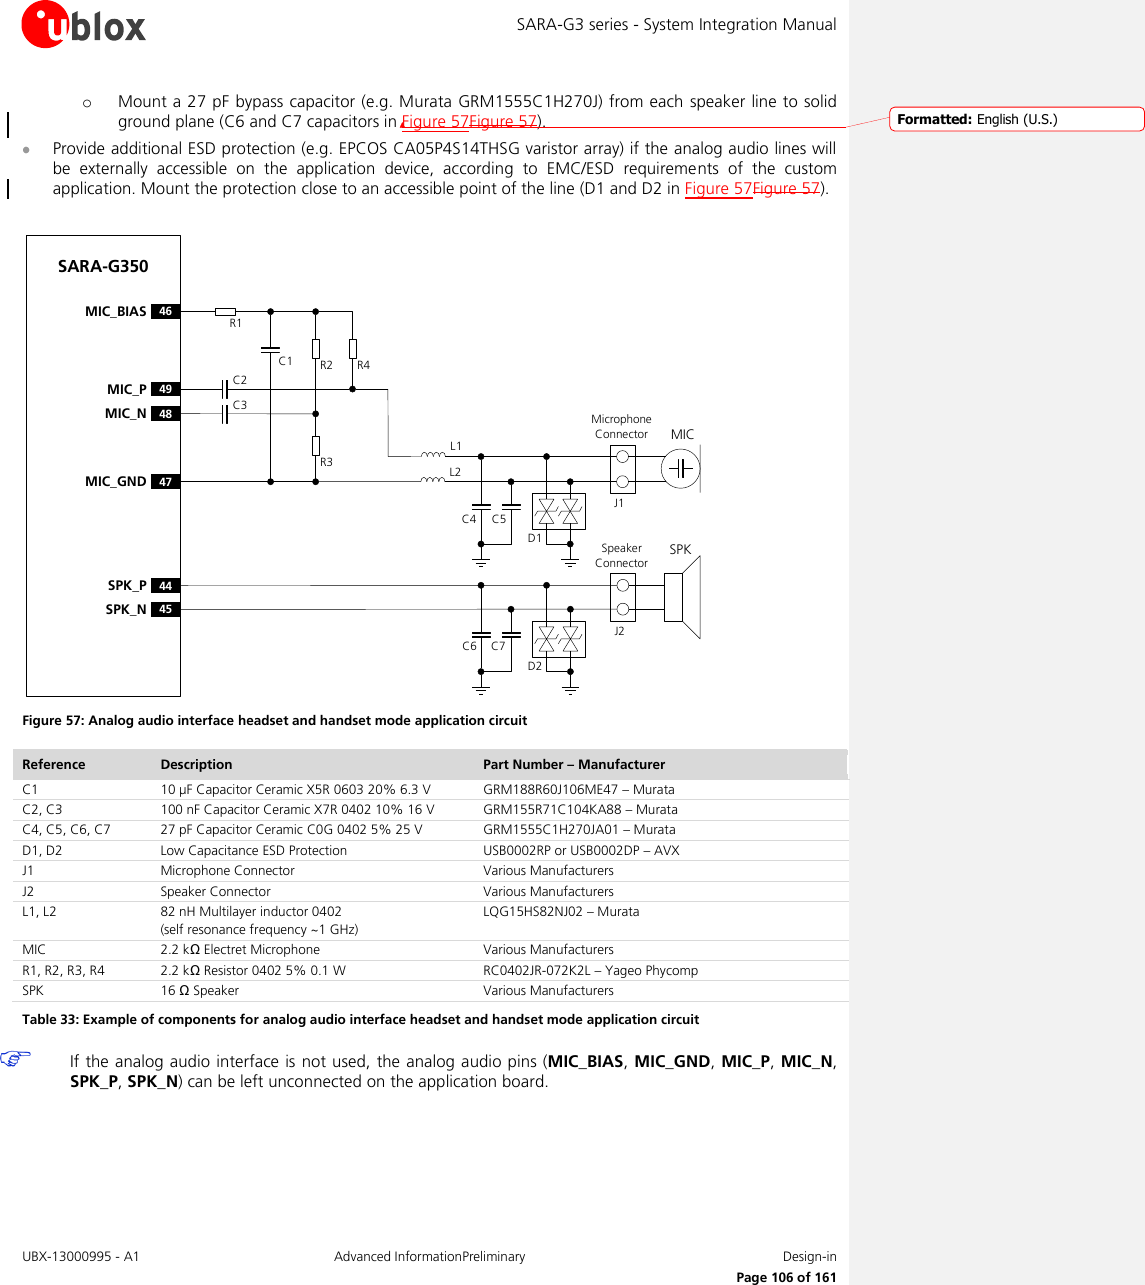 SARA-G3 series - System Integration Manual UBX-13000995 - A1  Advanced InformationPreliminary  Design-in     Page 106 of 161 o Mount a 27 pF bypass capacitor (e.g. Murata GRM1555C1H270J) from each speaker line to solid ground plane (C6 and C7 capacitors in Figure 57Figure 57).  Provide additional ESD protection (e.g. EPCOS CA05P4S14THSG varistor array) if the analog audio lines will be  externally  accessible  on  the  application  device,  according  to  EMC/ESD  requirements  of  the  custom application. Mount the protection close to an accessible point of the line (D1 and D2 in Figure 57Figure 57).  SARA-G35049MIC_PR1R2 R444SPK_P48MIC_N45SPK_NR3C146MIC_BIAS47MIC_GNDC2C3D2D1C6 C7L2L1C5C4SPKSpeaker ConnectorJ2Microphone Connector MICJ1 Figure 57: Analog audio interface headset and handset mode application circuit Reference Description Part Number – Manufacturer C1 10 µF Capacitor Ceramic X5R 0603 20% 6.3 V GRM188R60J106ME47 – Murata C2, C3 100 nF Capacitor Ceramic X7R 0402 10% 16 V GRM155R71C104KA88 – Murata C4, C5, C6, C7 27 pF Capacitor Ceramic C0G 0402 5% 25 V  GRM1555C1H270JA01 – Murata D1, D2 Low Capacitance ESD Protection USB0002RP or USB0002DP – AVX J1 Microphone Connector Various Manufacturers  J2 Speaker Connector Various Manufacturers  L1, L2 82 nH Multilayer inductor 0402 (self resonance frequency ~1 GHz) LQG15HS82NJ02 – Murata MIC 2.2 kΩ Electret Microphone Various Manufacturers R1, R2, R3, R4 2.2 kΩ Resistor 0402 5% 0.1 W  RC0402JR-072K2L – Yageo Phycomp SPK 16 Ω Speaker  Various Manufacturers Table 33: Example of components for analog audio interface headset and handset mode application circuit  If the analog audio interface is not used,  the analog audio pins (MIC_BIAS, MIC_GND, MIC_P, MIC_N, SPK_P, SPK_N) can be left unconnected on the application board.  Formatted: English (U.S.)